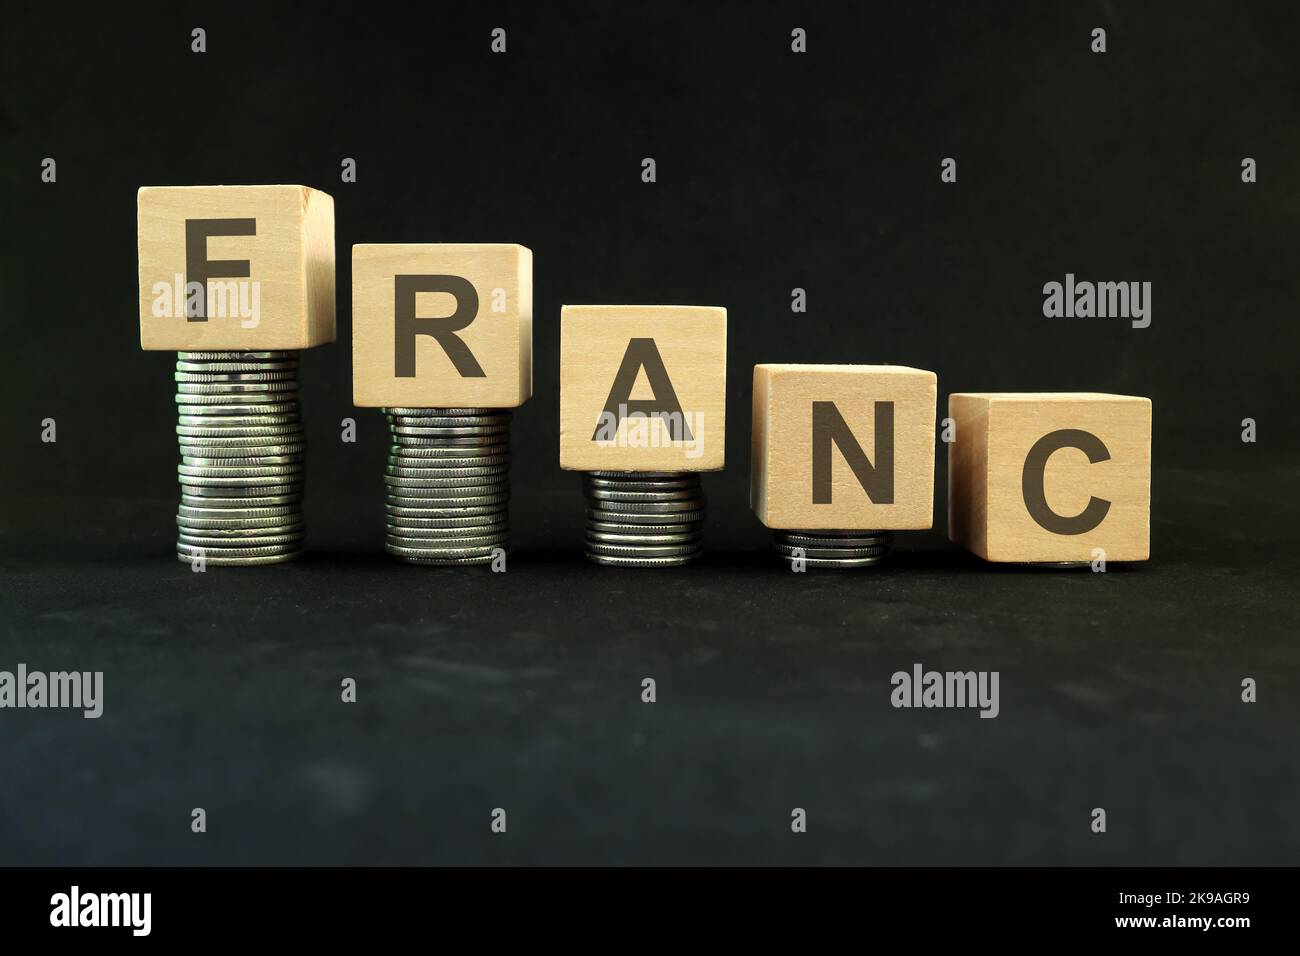 Swiss and French franc currency weakening, value depreciation and devaluation concept. Decreasing stack of coins on dark black background. Stock Photo